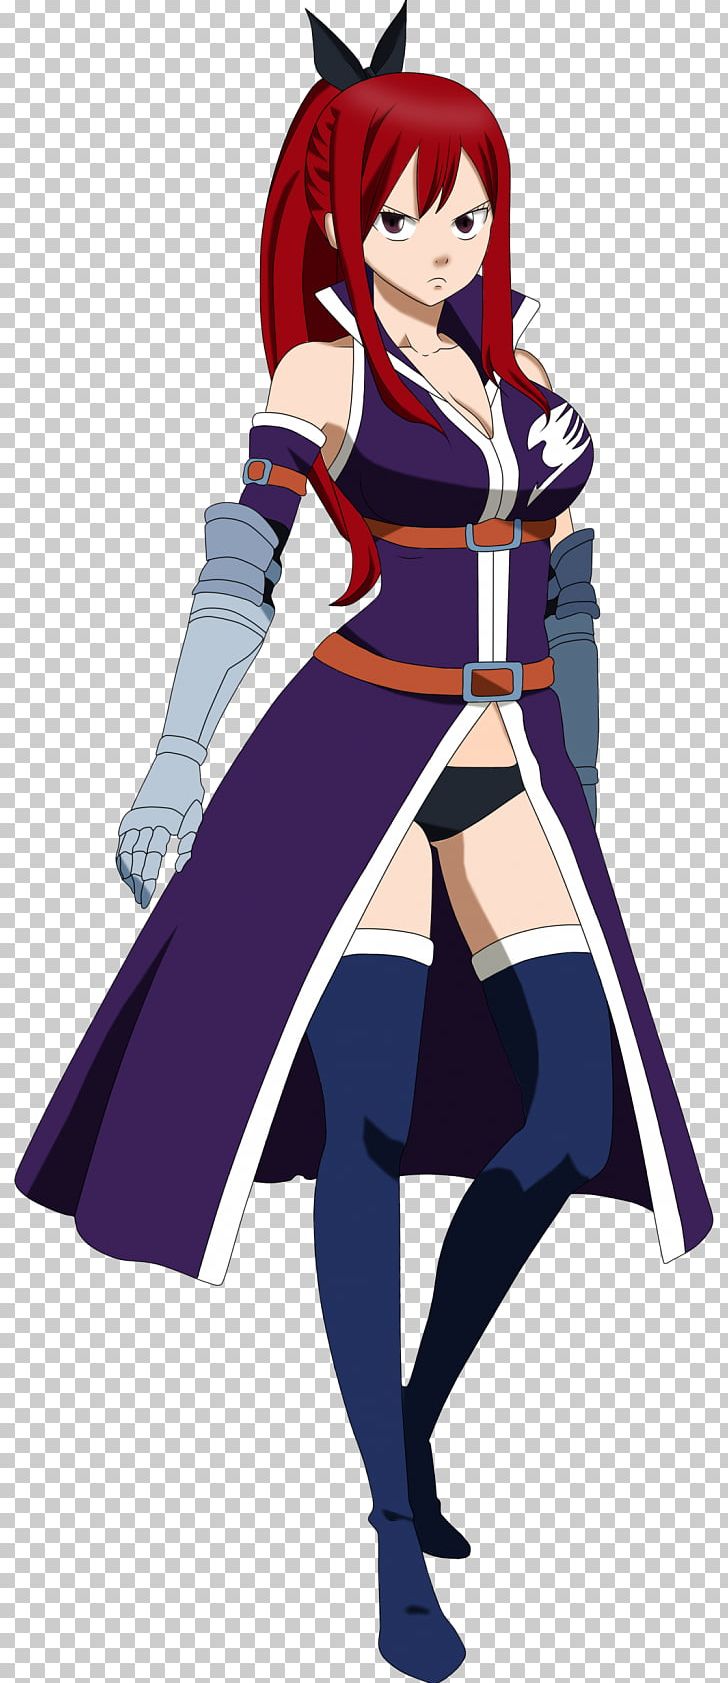 Erza Scarlet Natsu Dragneel Lucy Heartfilia Gray Fullbuster Costume PNG, Clipart, Anime, Art, Character, Clothing, Cosplay Free PNG Download